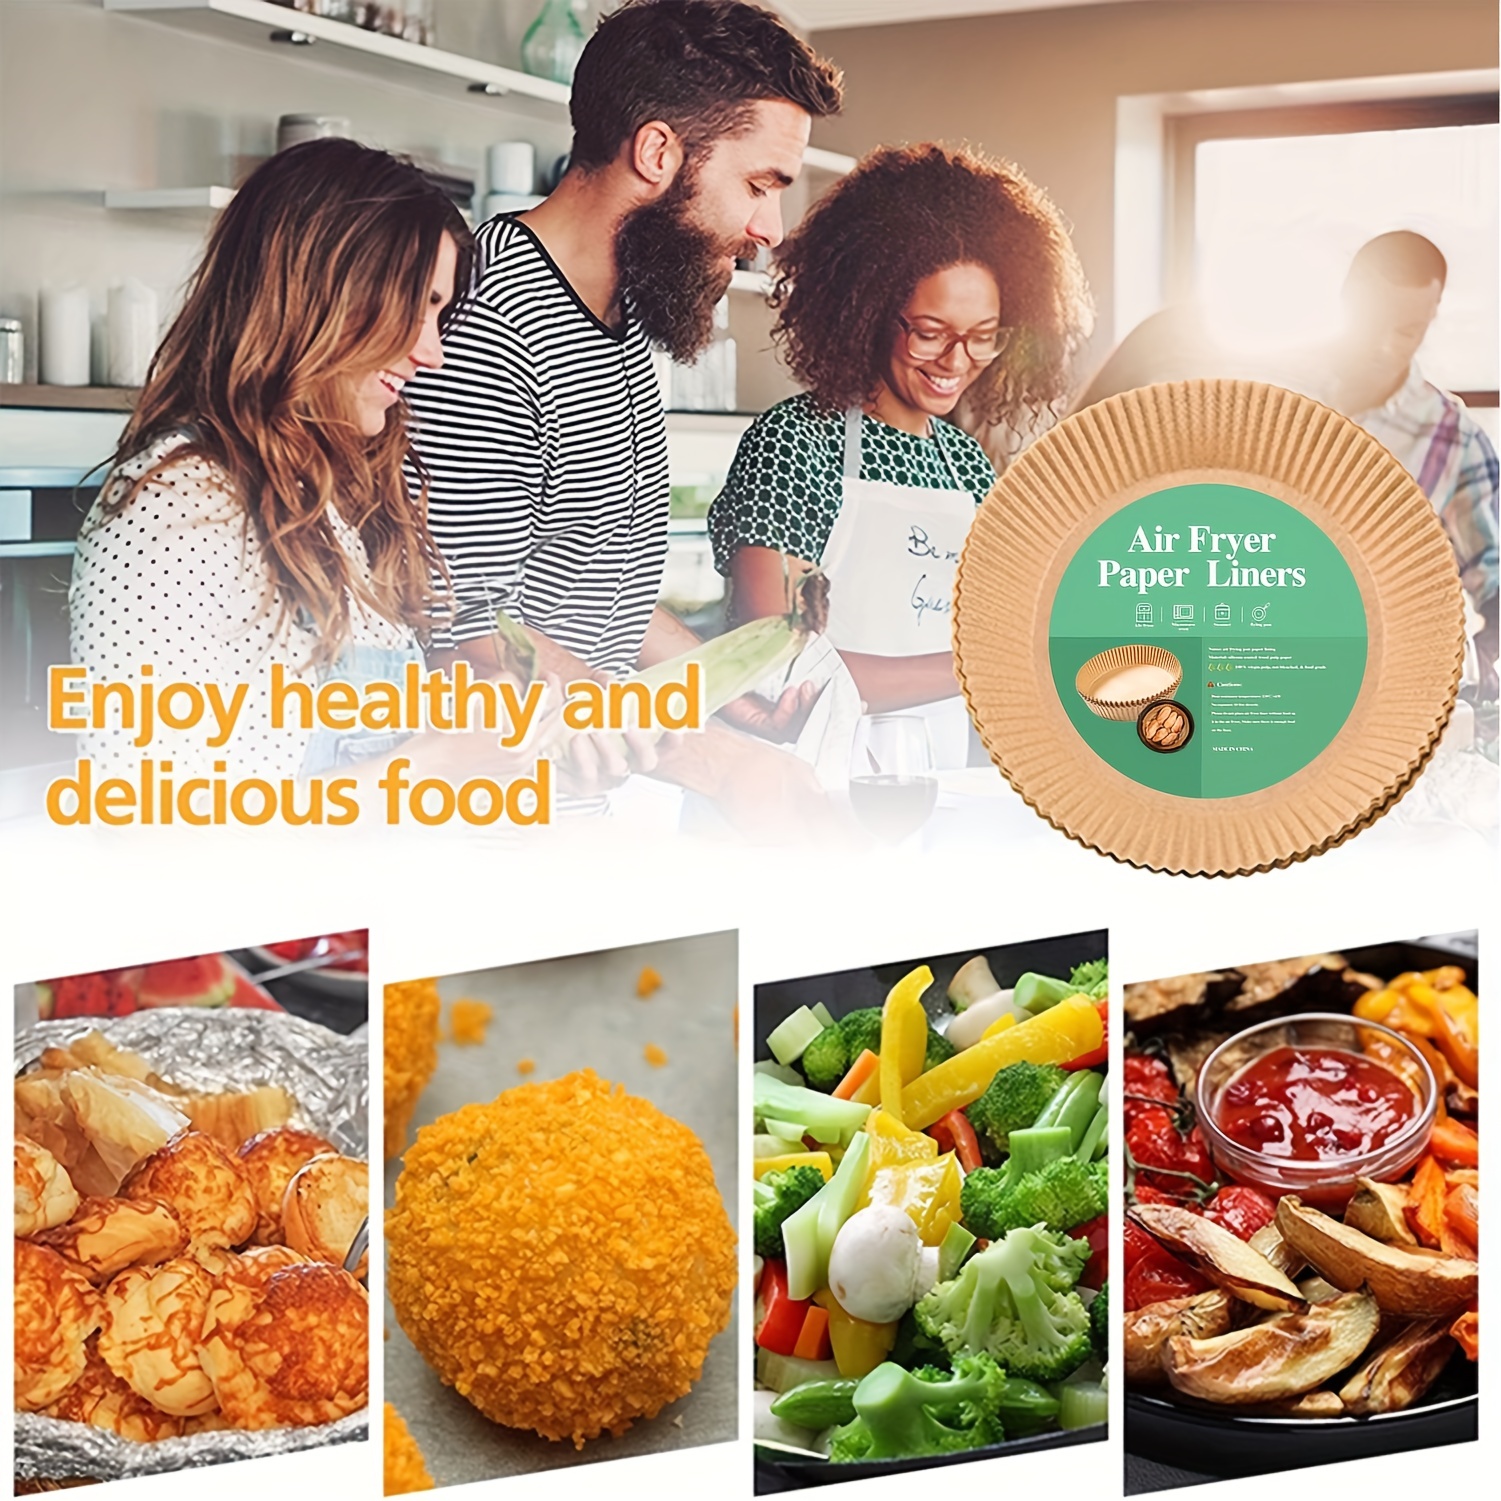 Non-stick Air Fryer Liners For Oil-free Cooking - Disposable Paper